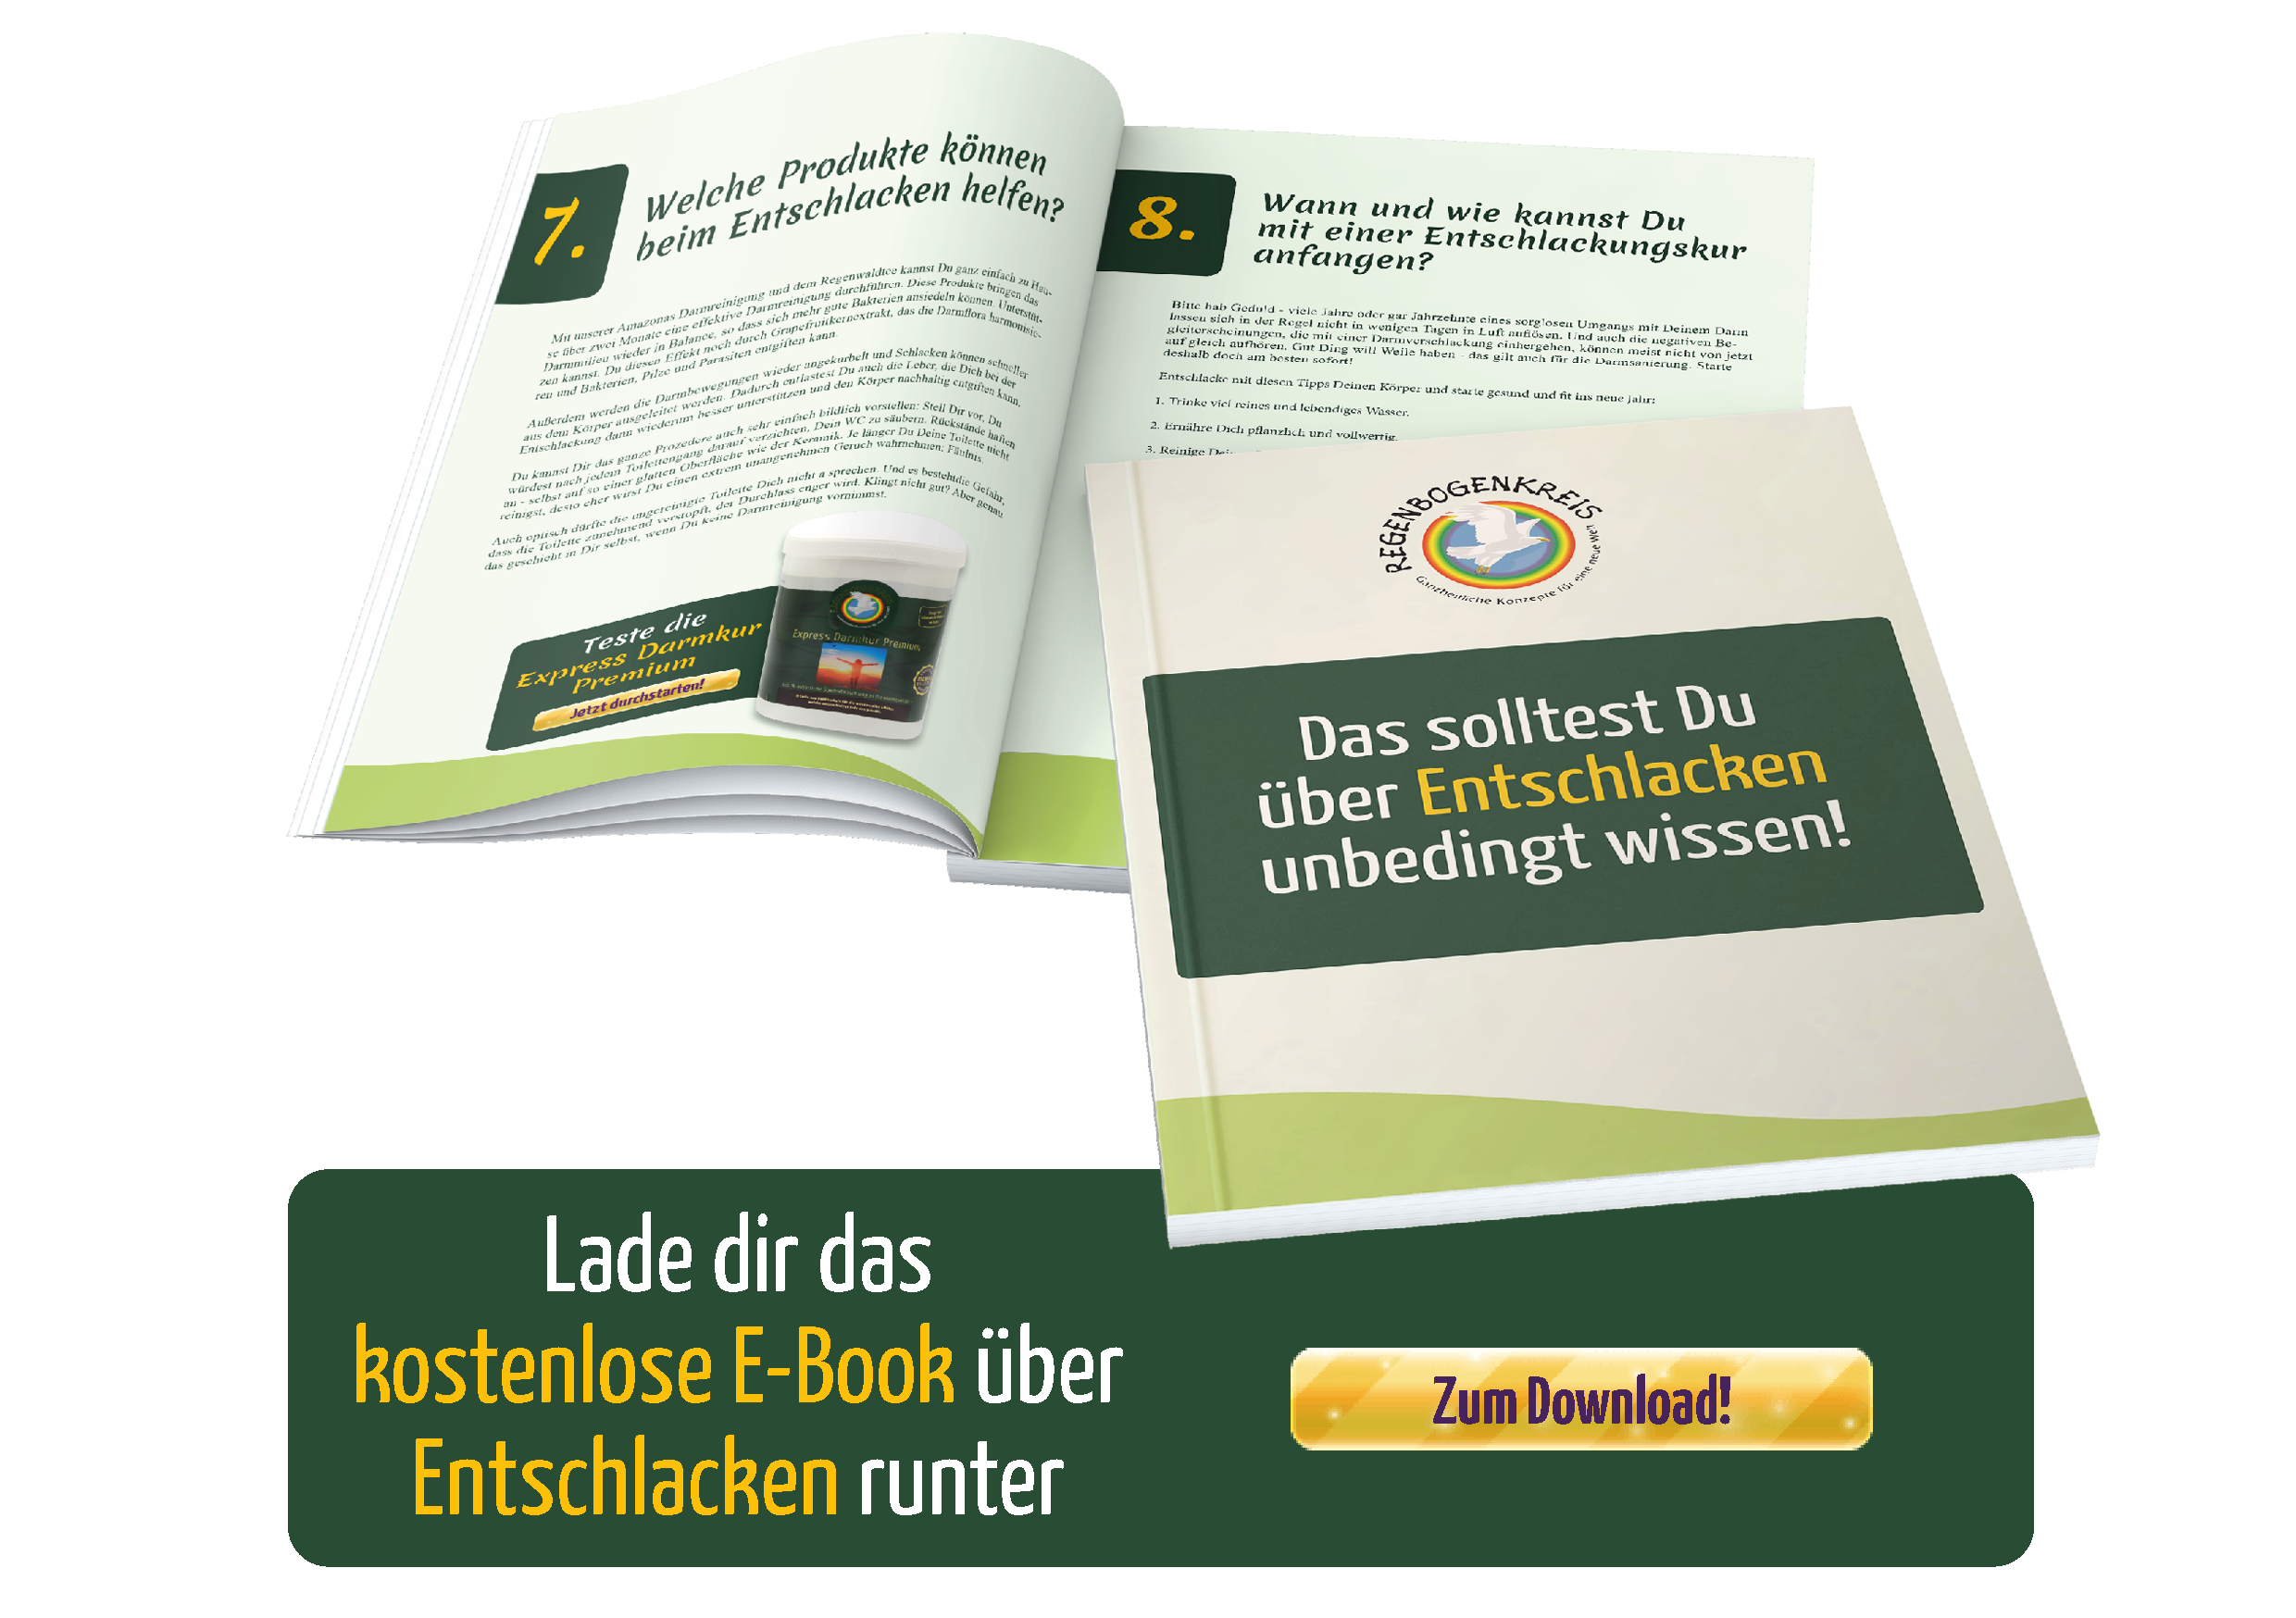 Neuer Call-to-Action